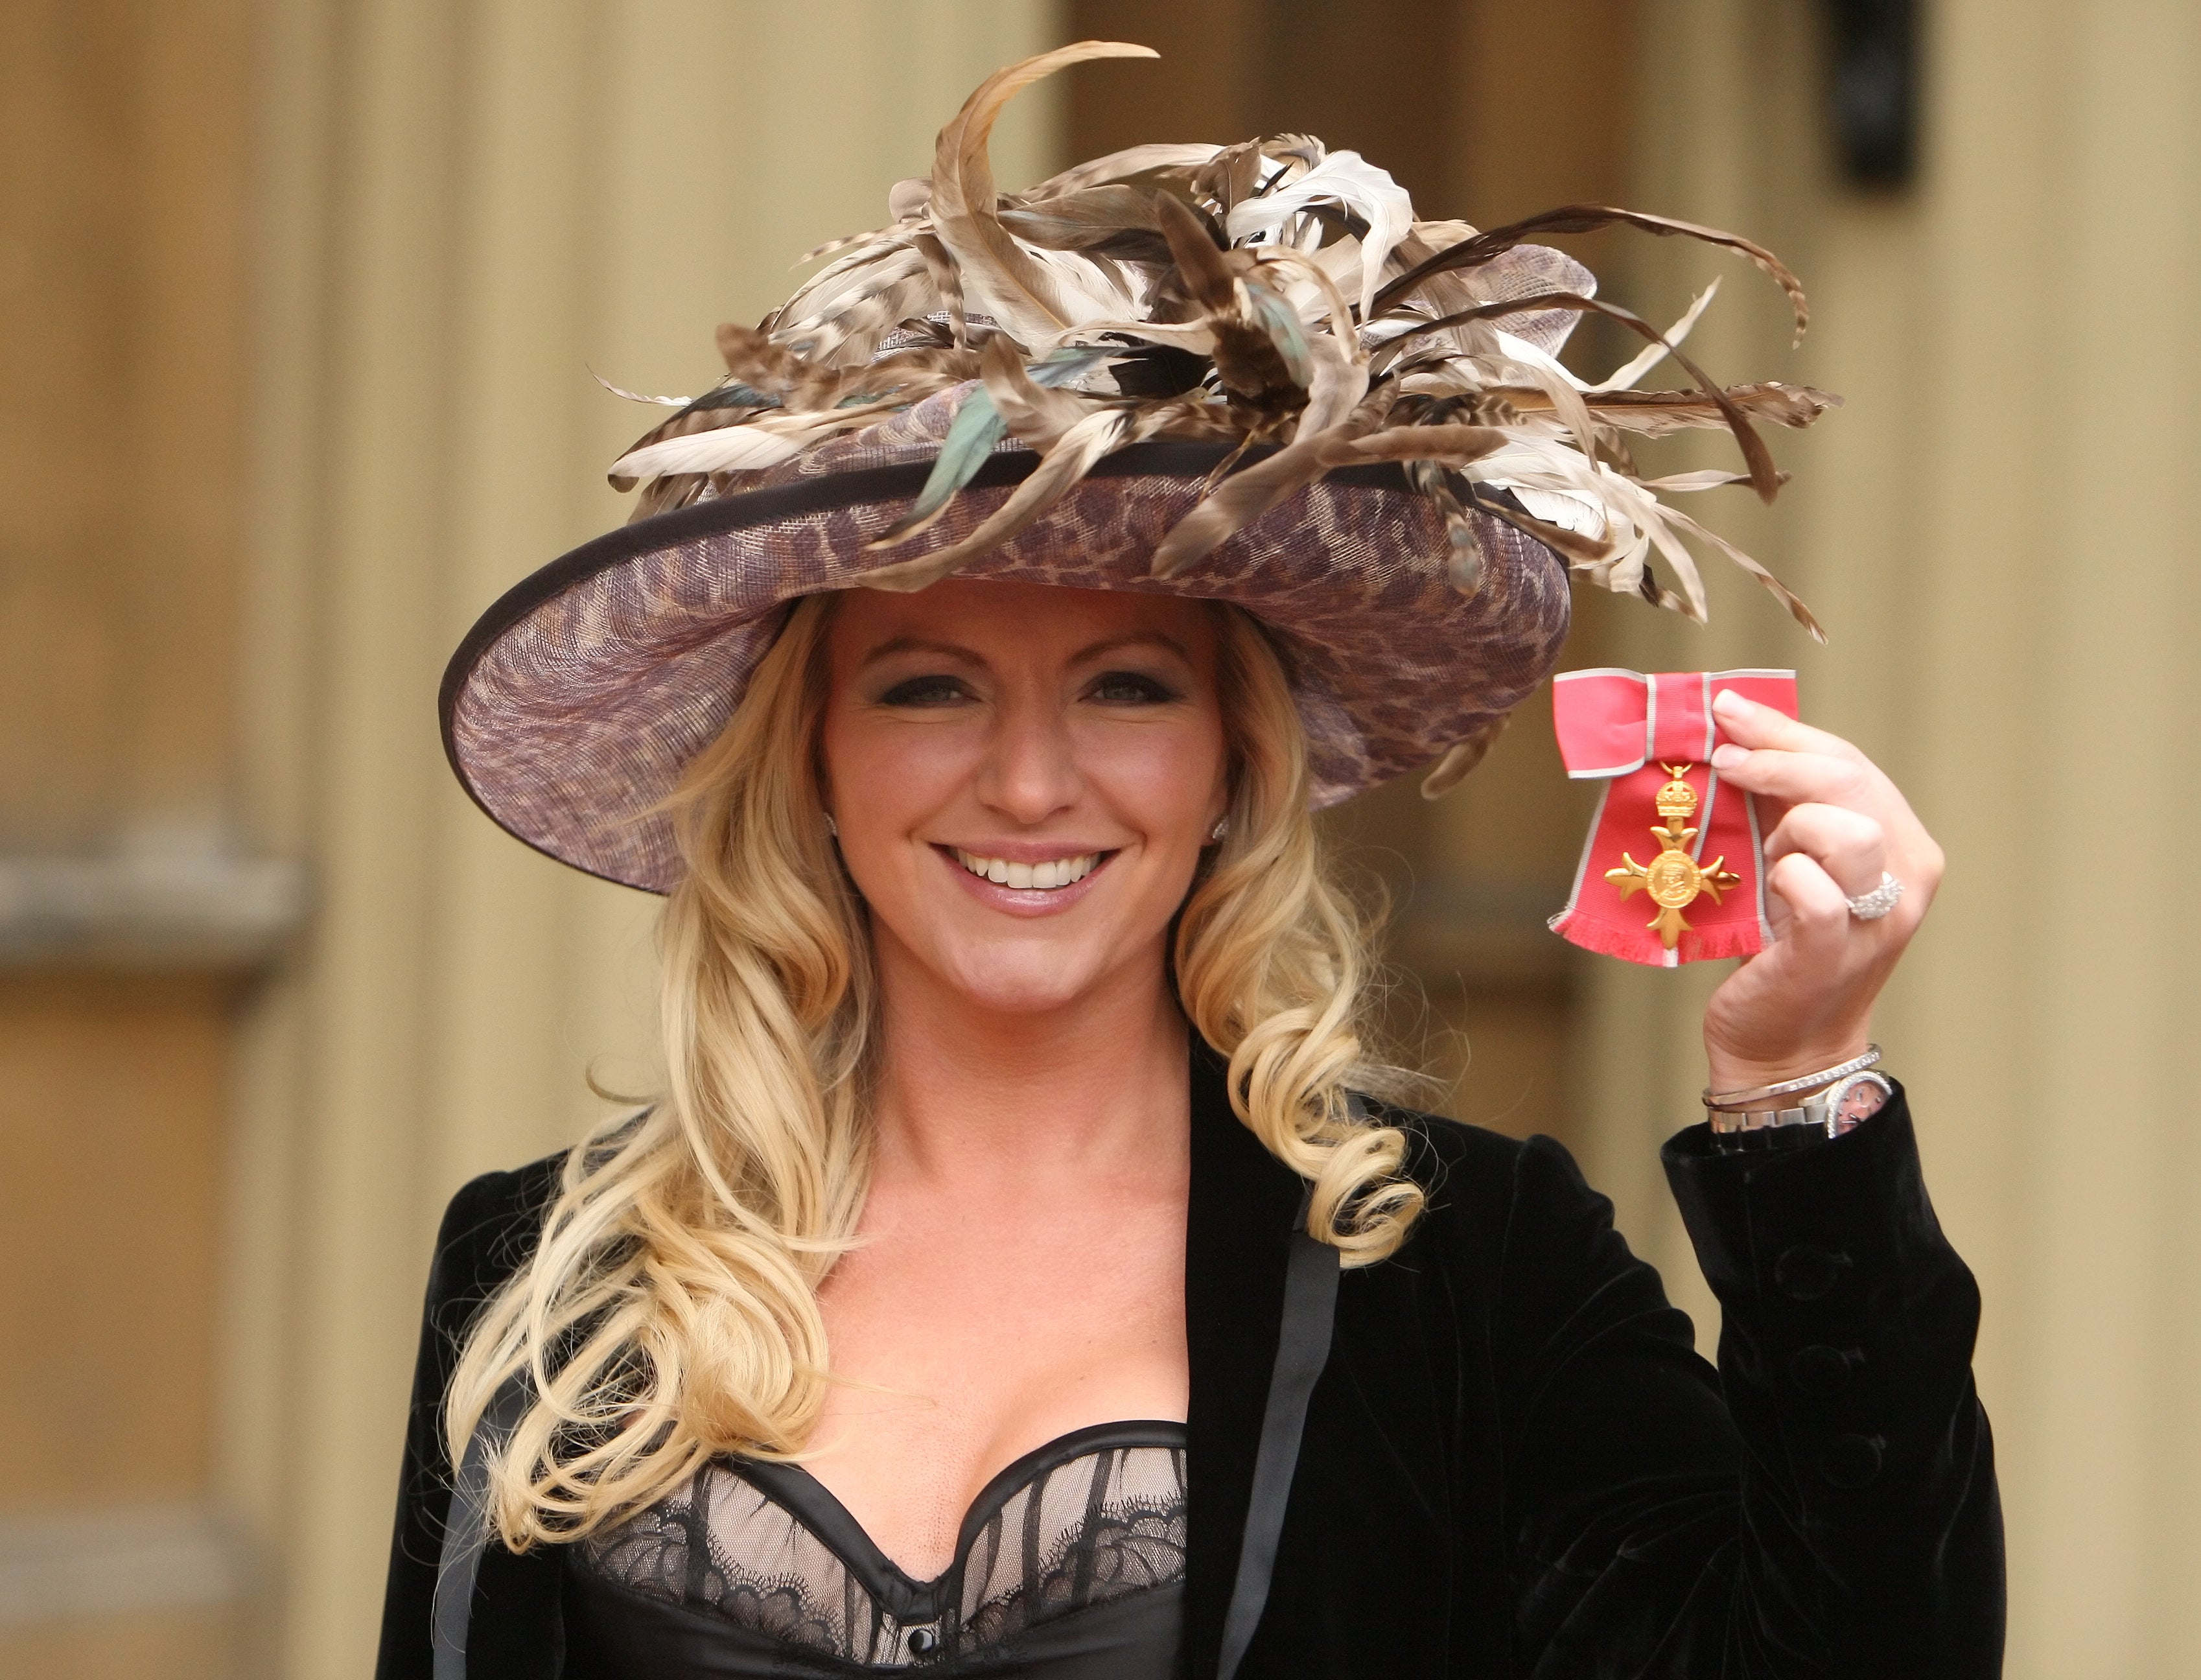 Originally from the East end of Glasgow, Baroness Mone earned an OBE in 2010 for her contribution to business.